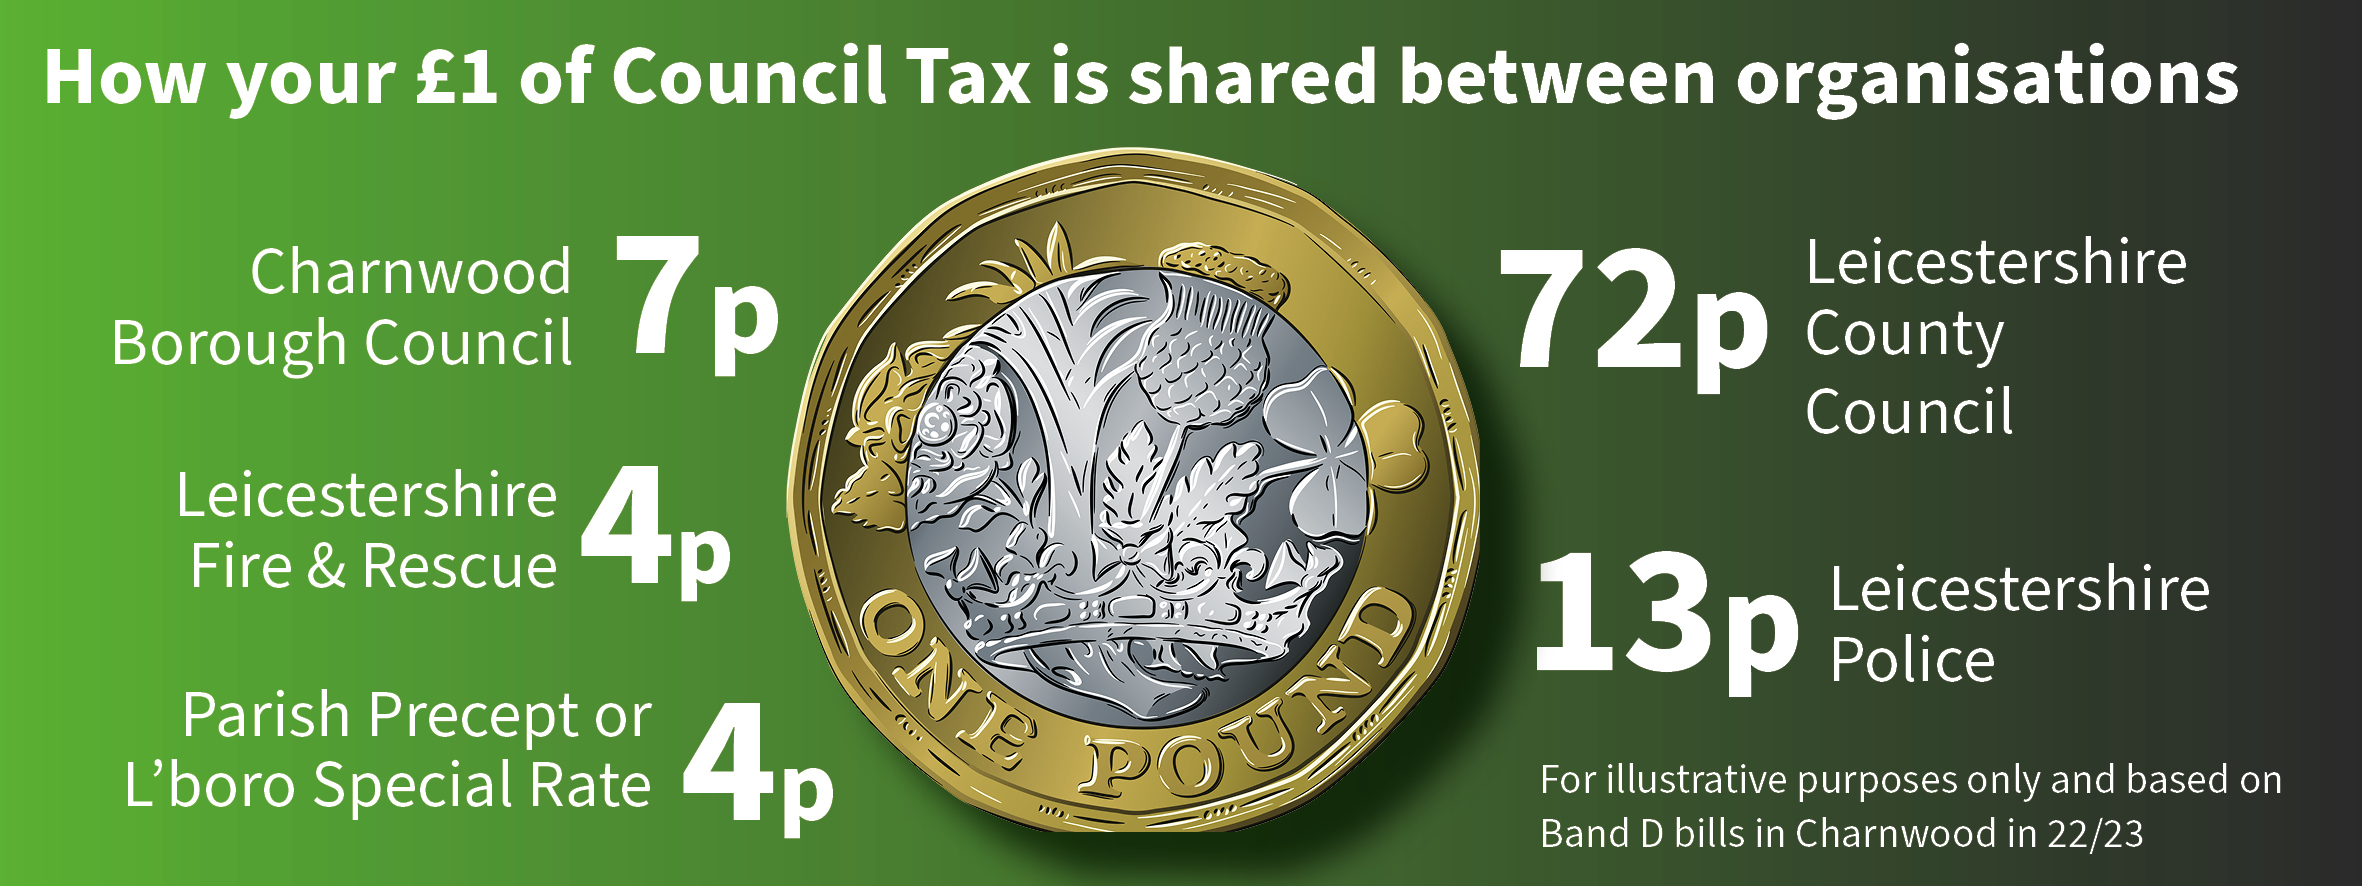 The image shows a pound coin with a list of how Council Tax is divided in Charnwood.Leicestershire County Council receives 72p in every pound, Leicestershire Police receives 13p, Charnwood Borough Council 7p, Fire Service 4p and then the town or parish council precept (or Loughborough Special Rate) is 4p. These figures are for illustrative purposes only and are based on Band D bills in Charnwood in 22/23